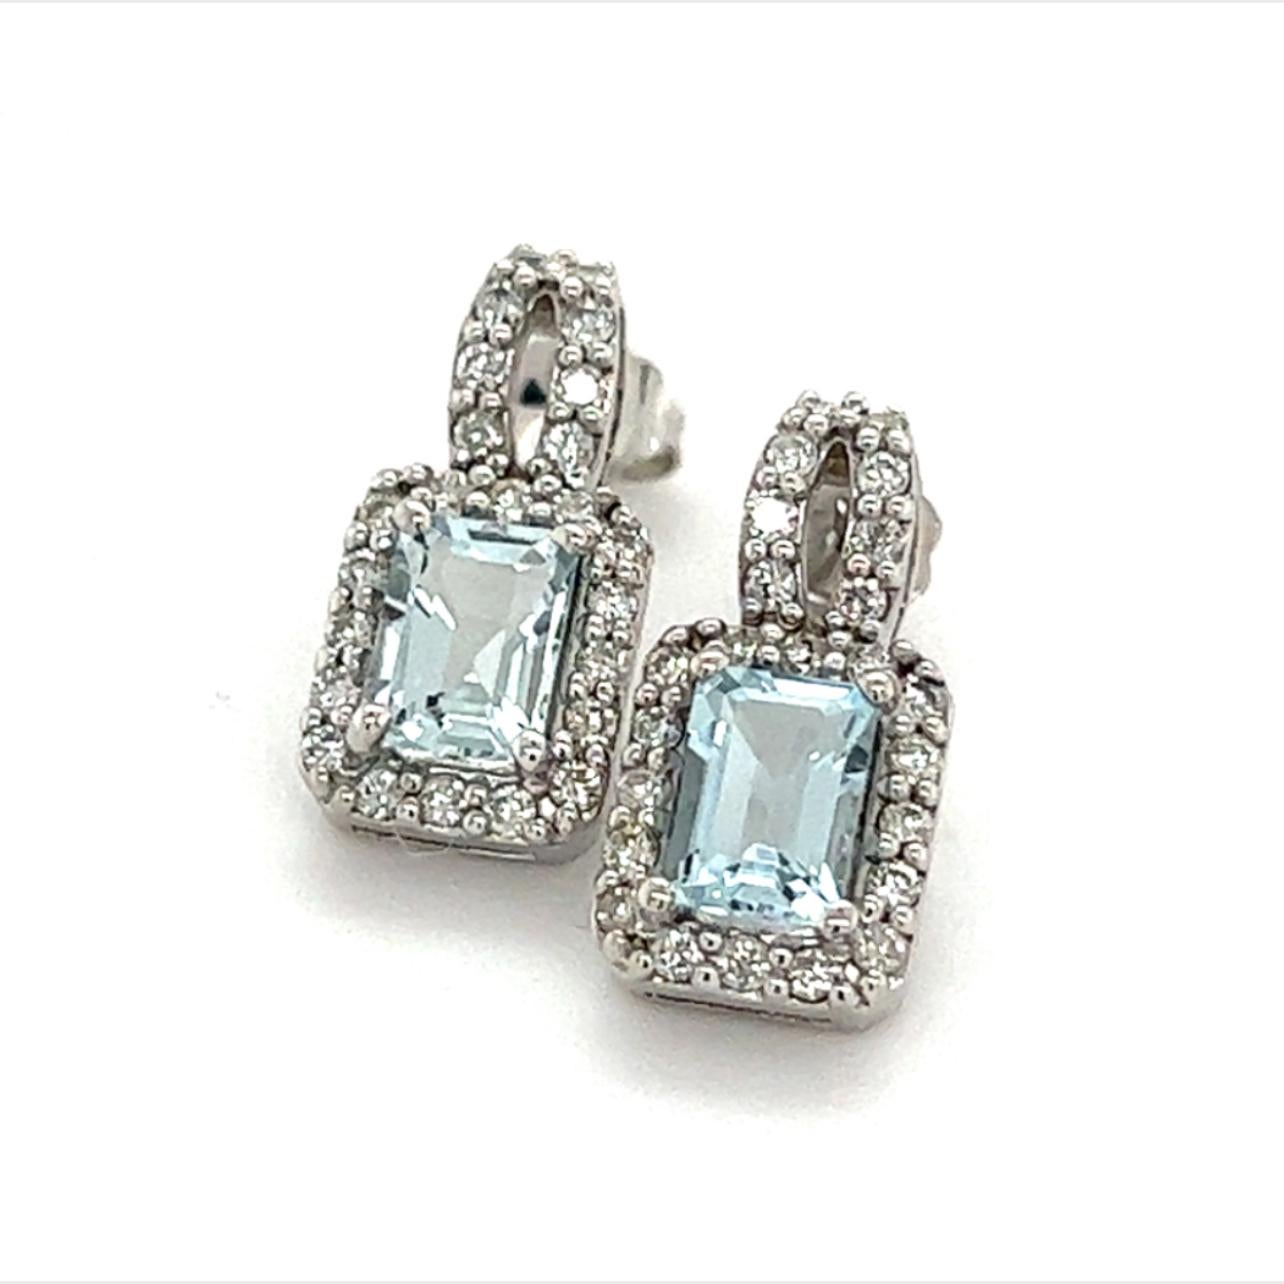 Natural Aquamarine Diamond Earrings 14k Gold 2.38 TCW Certified For Sale 6